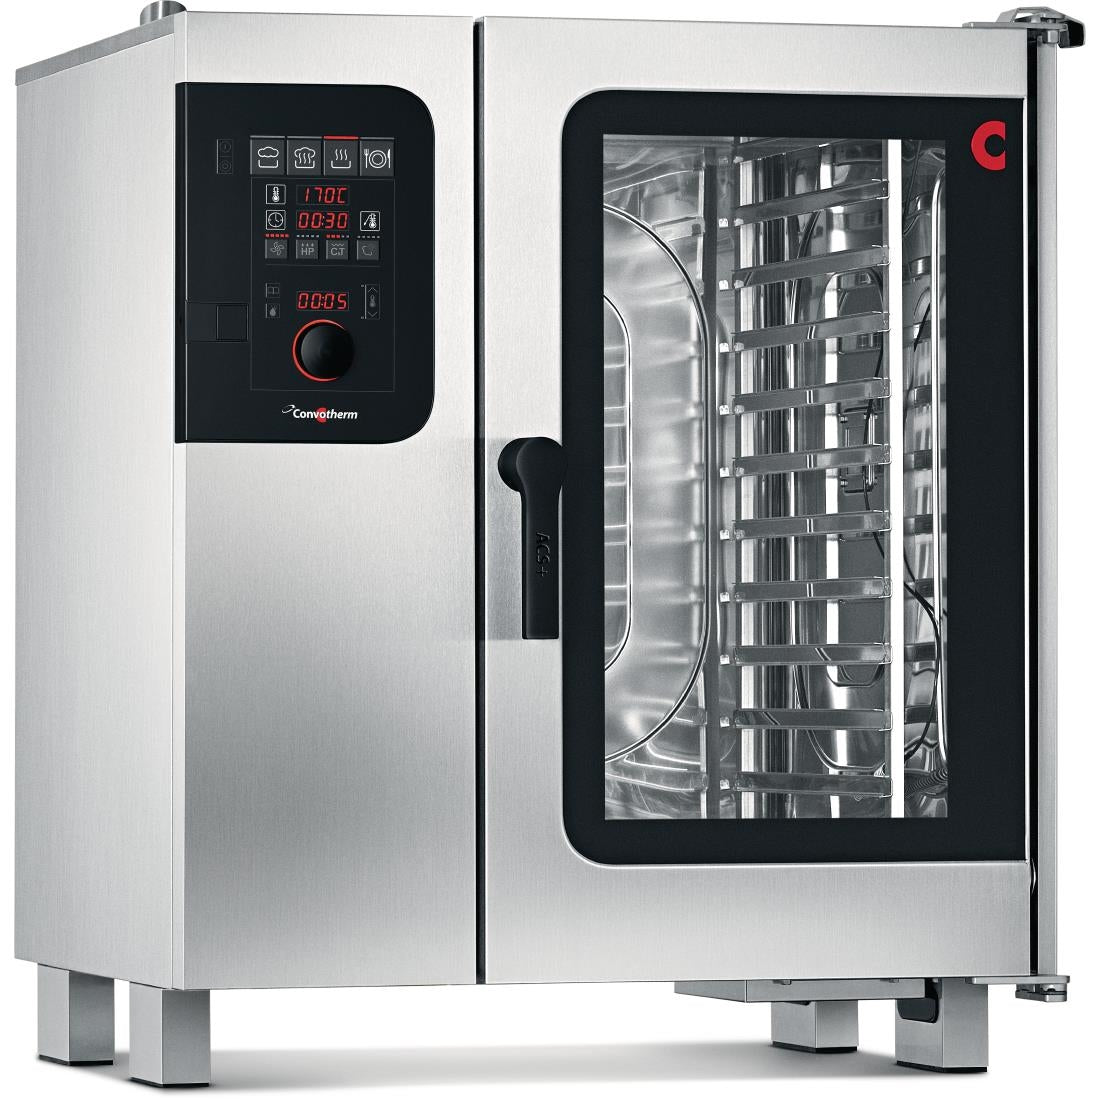 DR443-MO Convotherm 4 easyDial Combi Oven 10 x 1 x1 GN Grid JD Catering Equipment Solutions Ltd